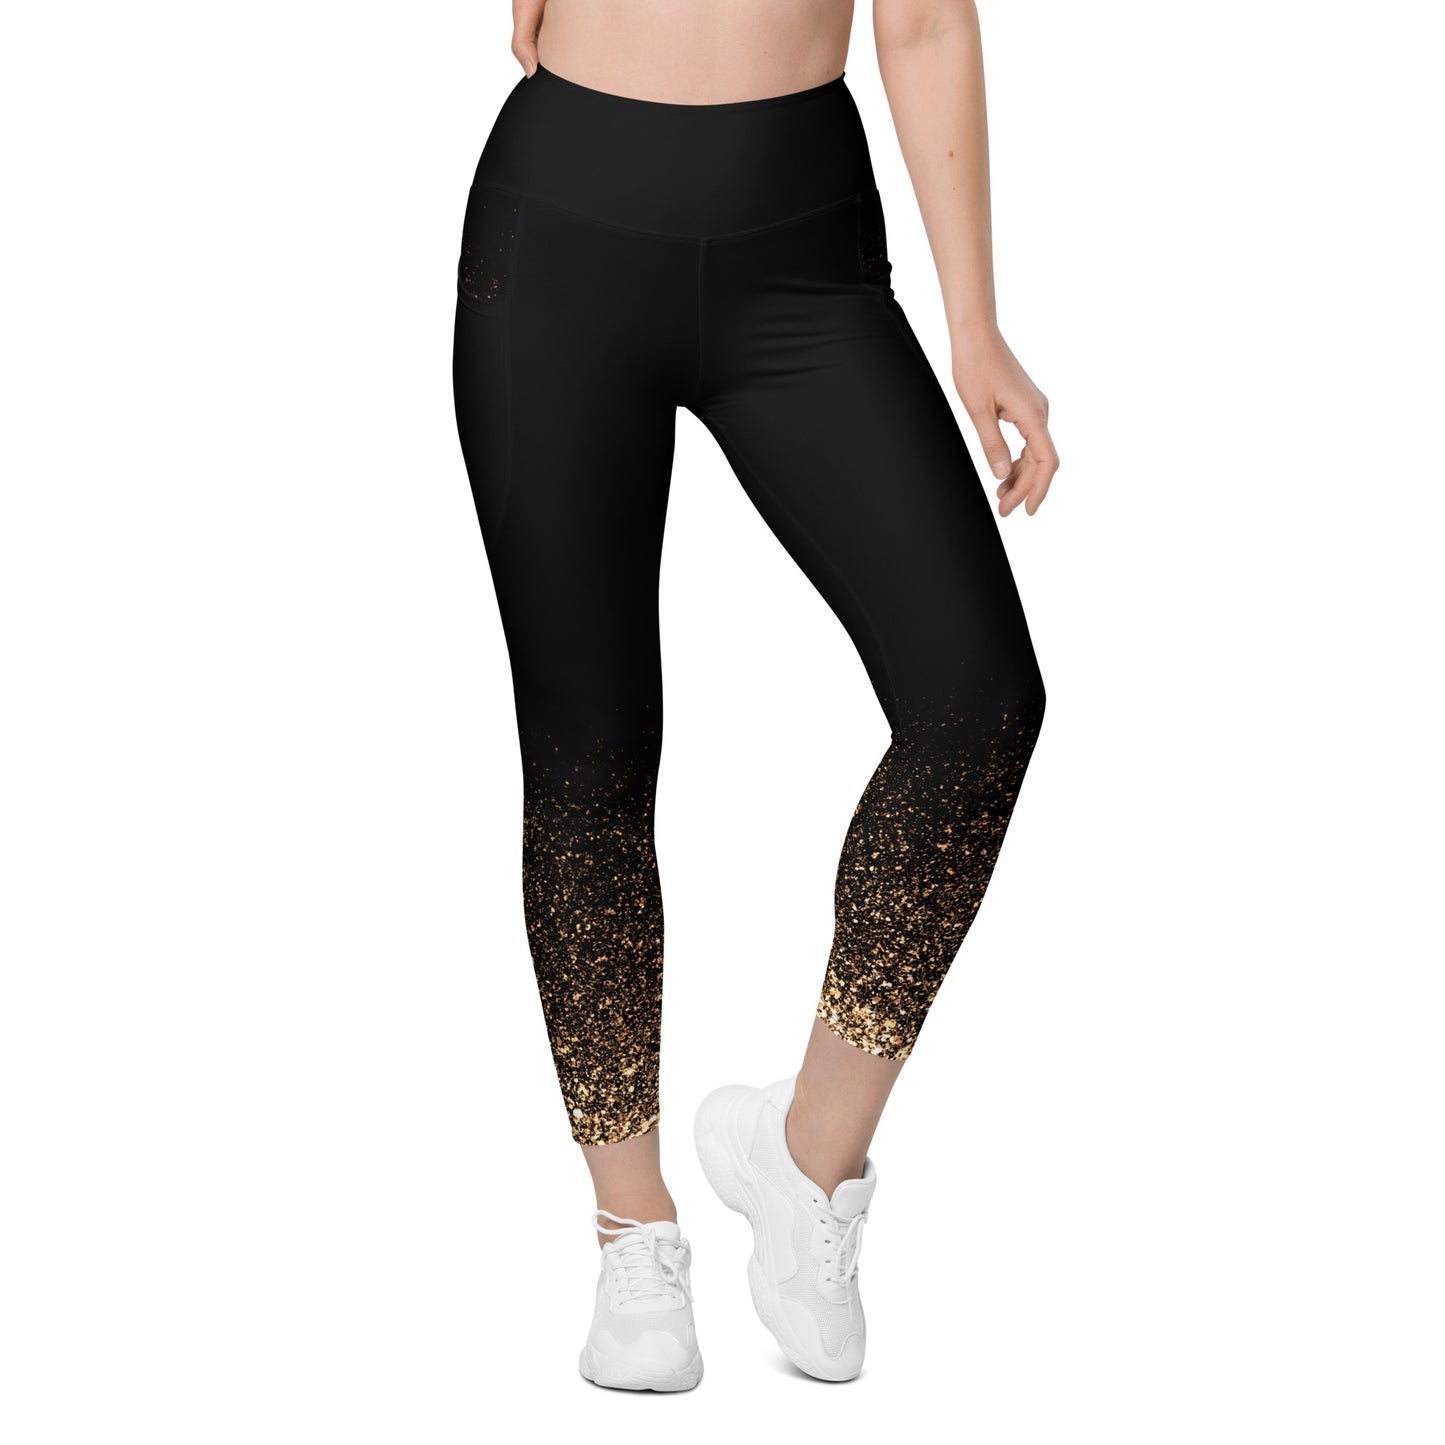 Grinnell Street Gold Leggings with pockets